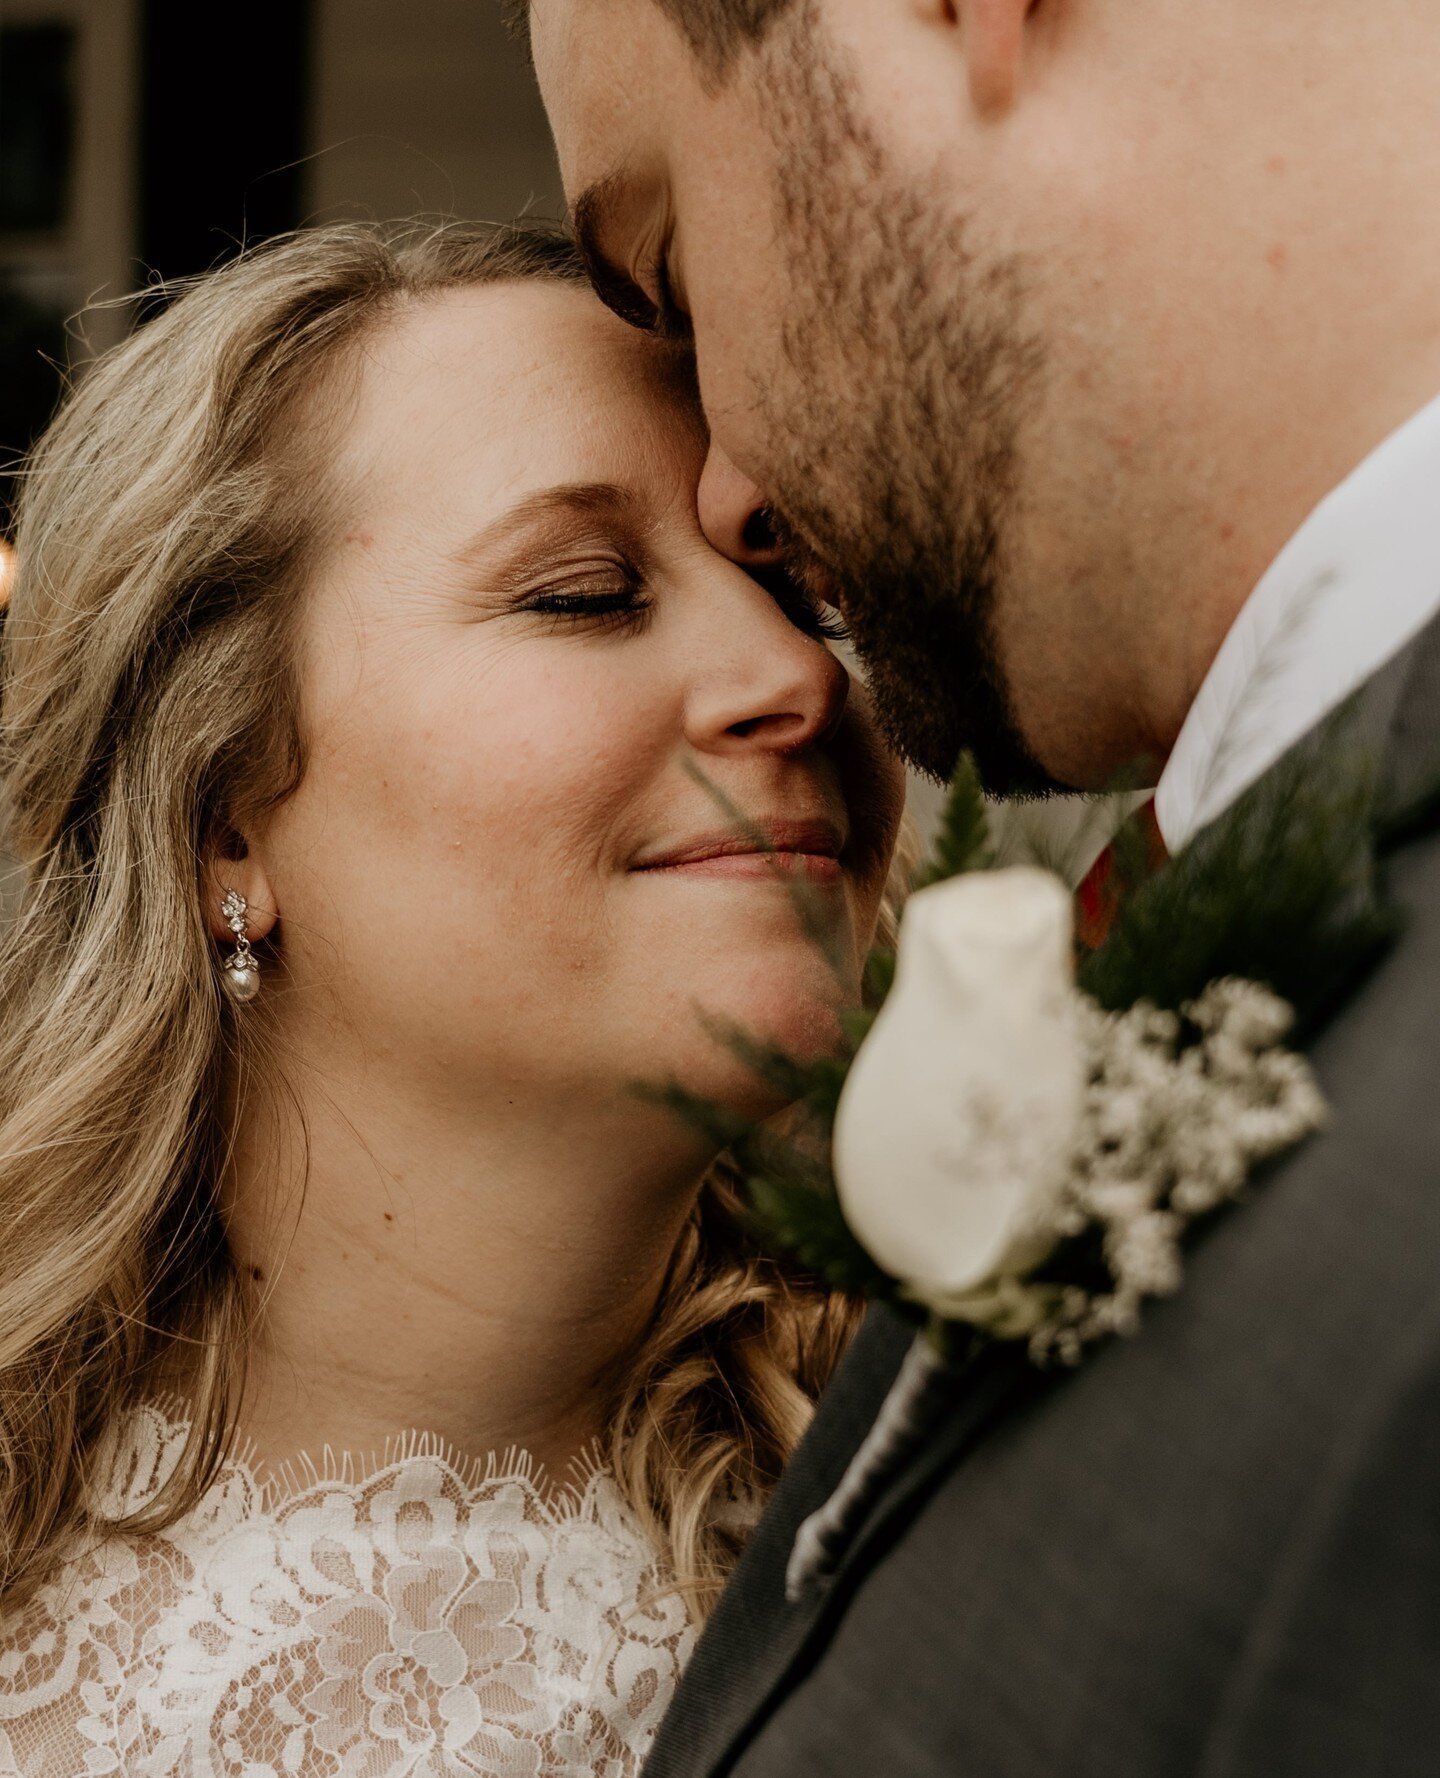 These special moments that can be revisited over and over... That's what it's all about!⁠
⁠
#nashvilleweddingphotographers #nashvilleweddingphotography #nashvilleelopement #love #wedding #elope #nashvillephotographer #franklintennessee #elopenashvill